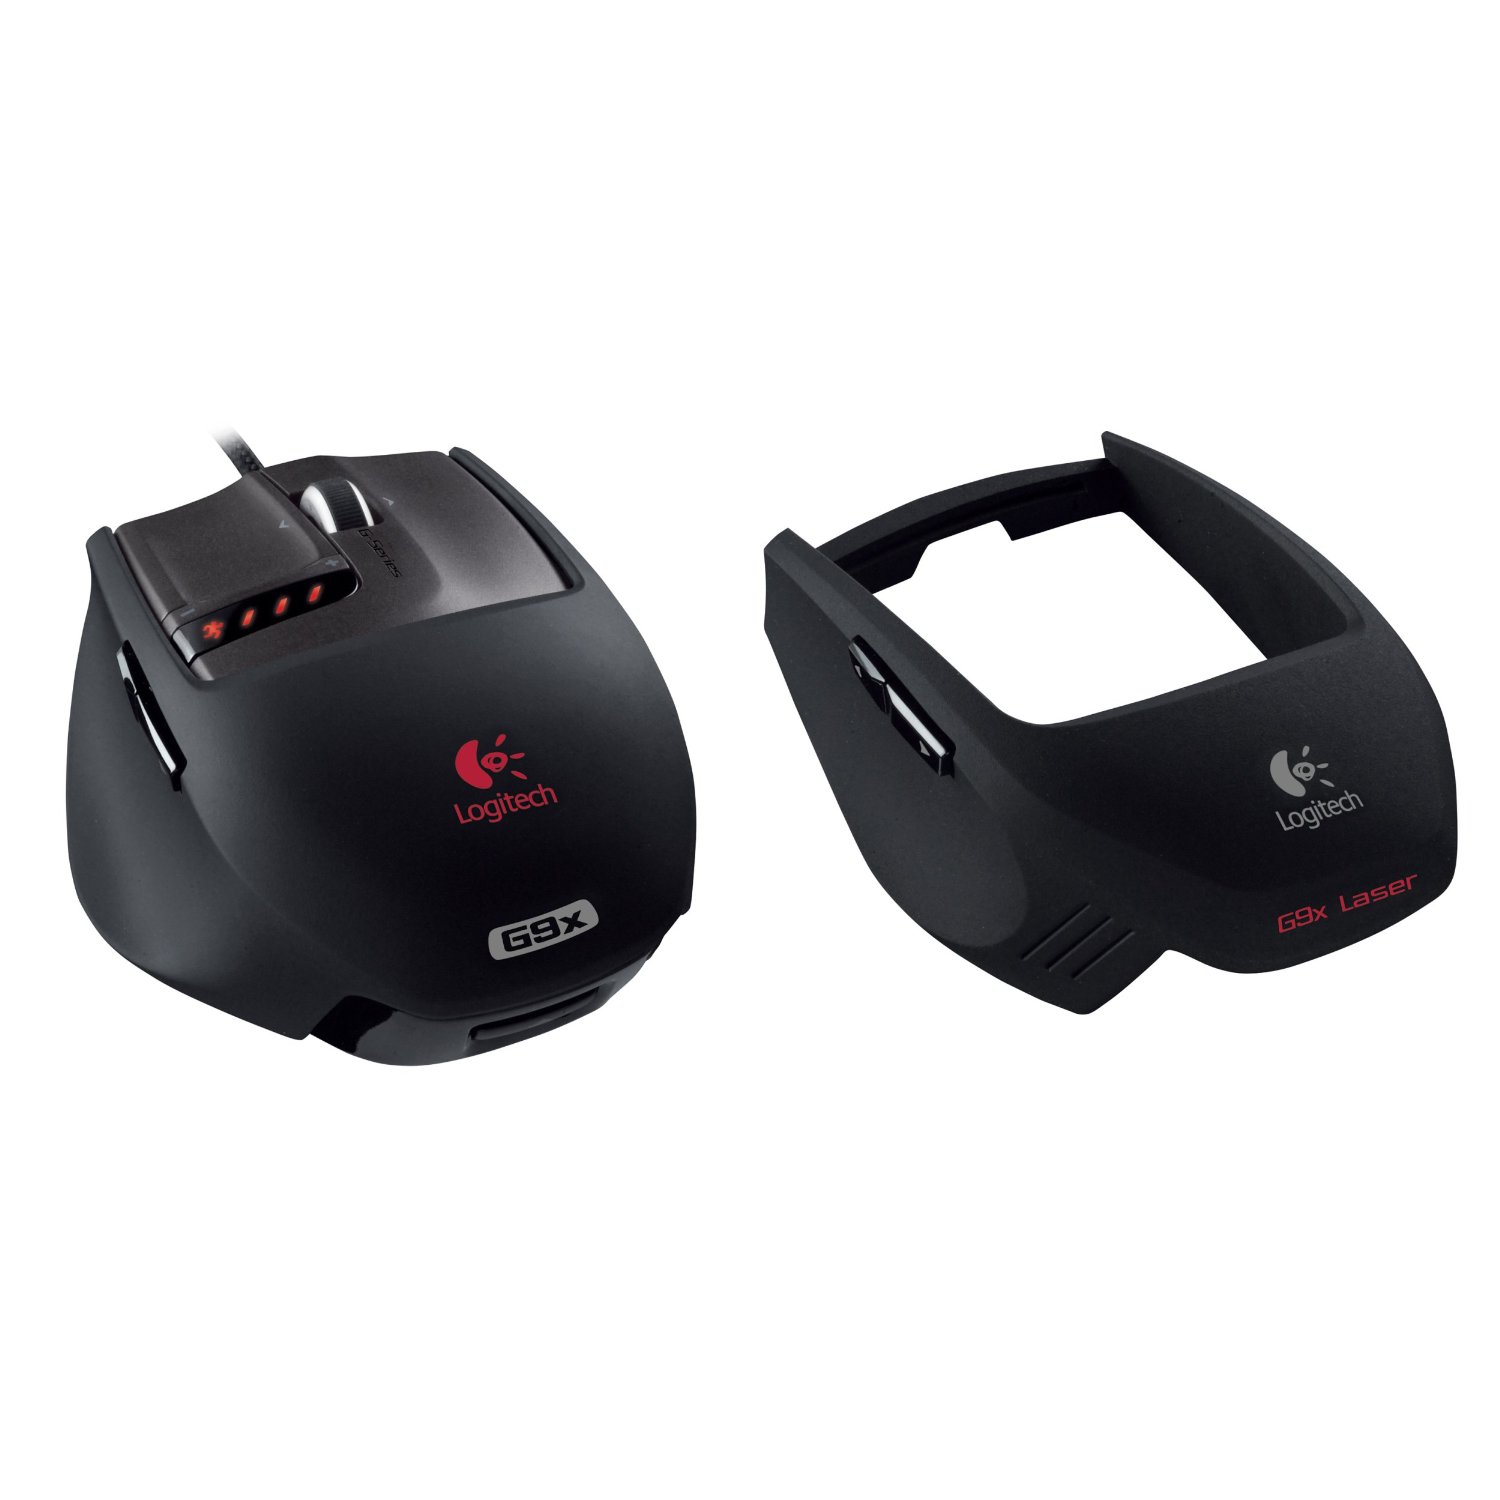 http://thetechjournal.com/wp-content/uploads/images/1111/1321182752-logitech-g9x-programmable-laser-gaming-mouse-10.jpg